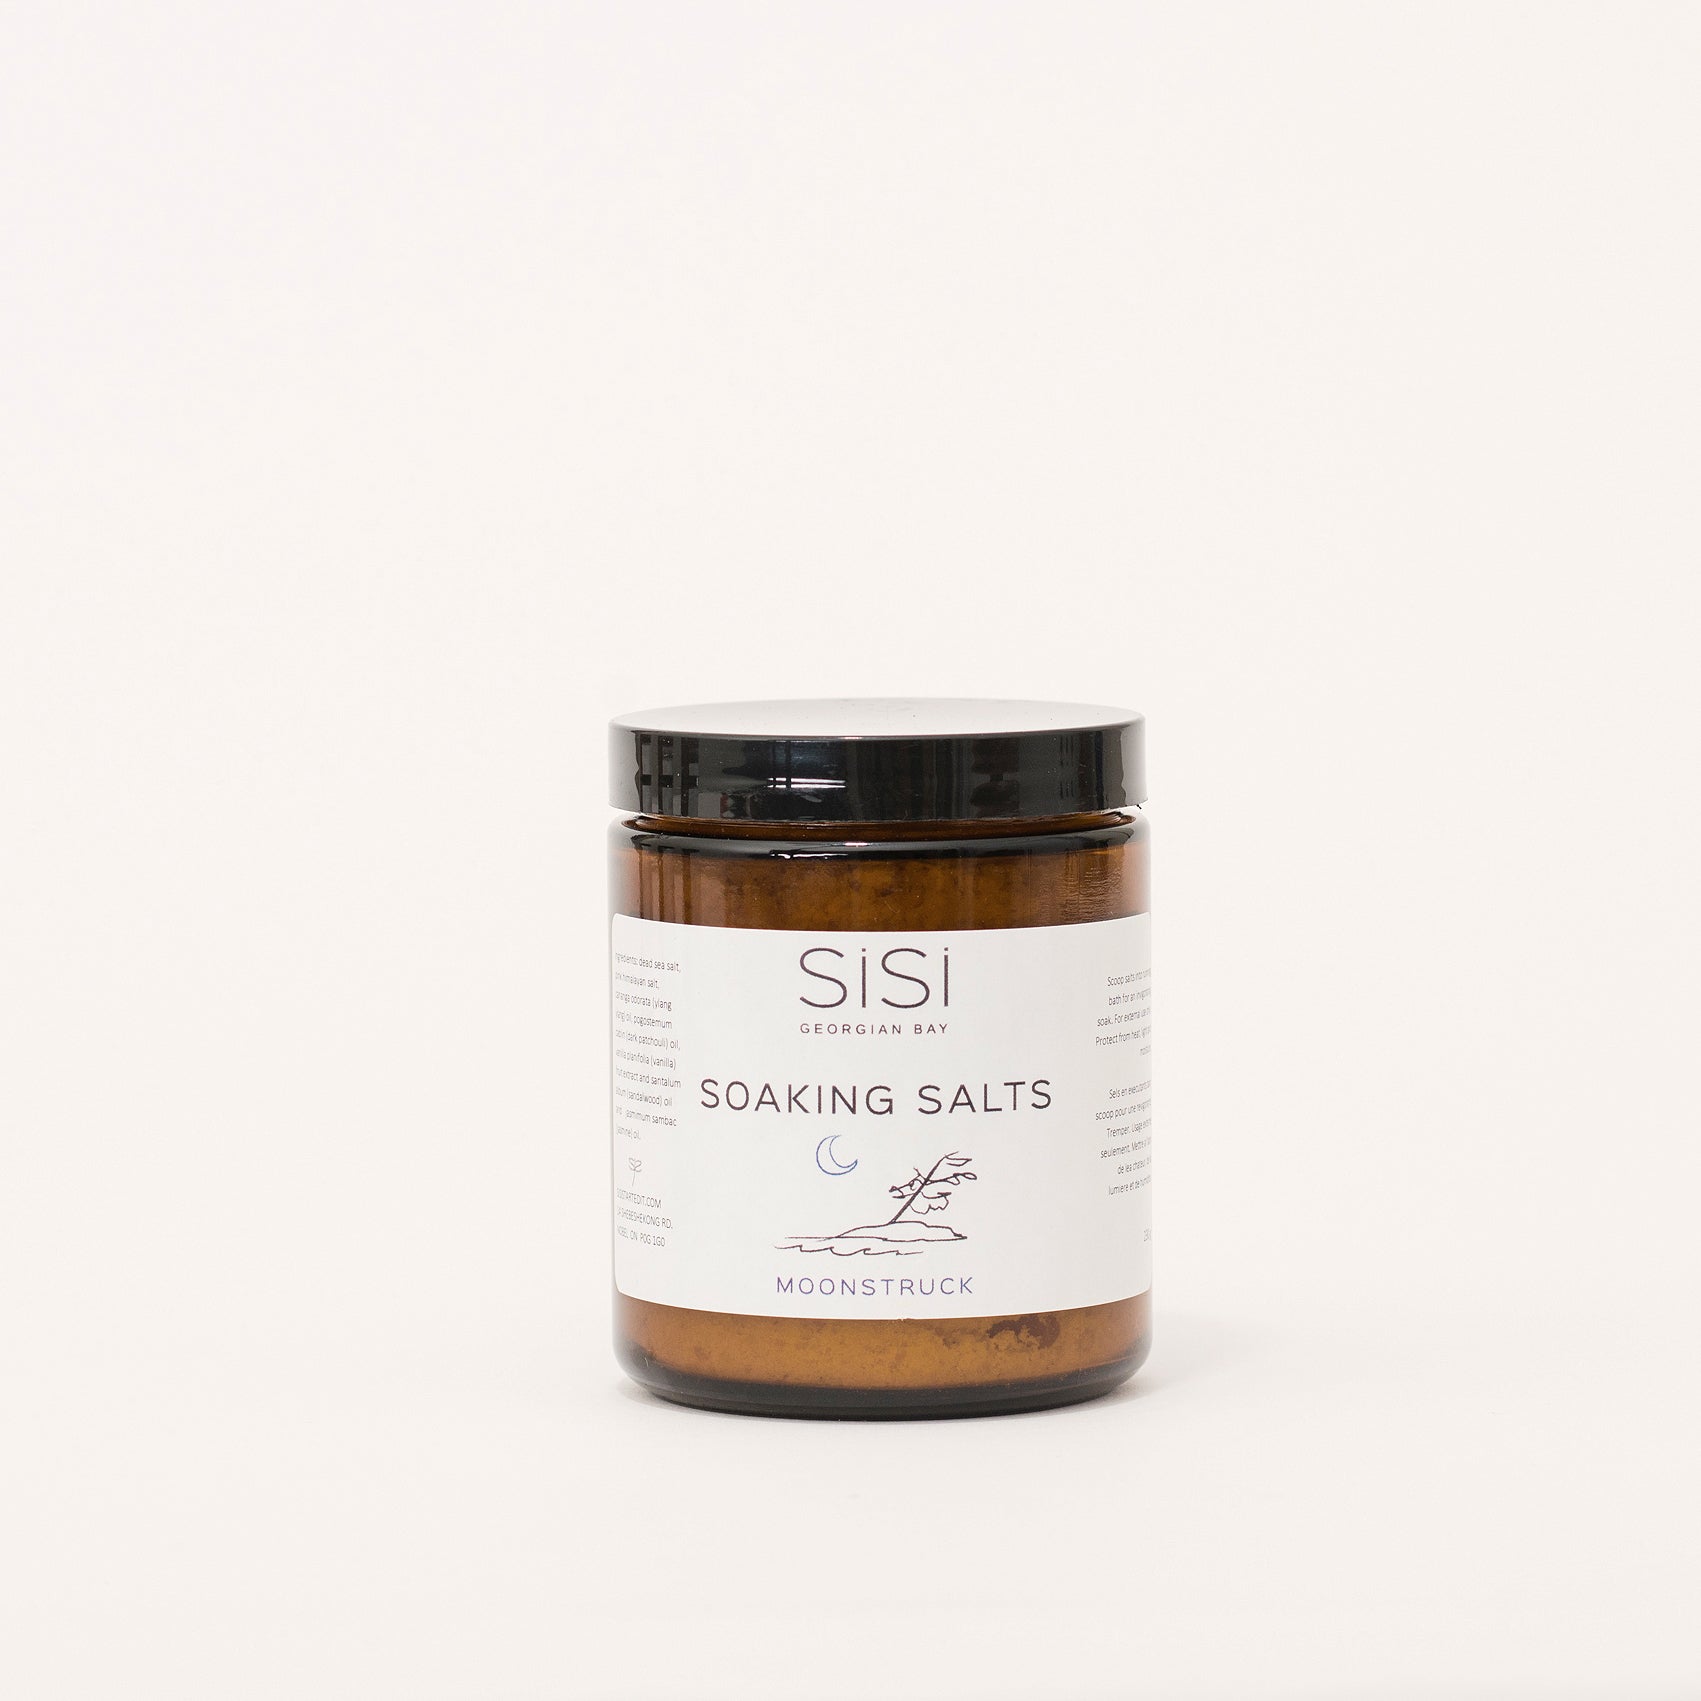 Apothecary Bath and Body Products - SiSi Georgian Bay Soaking Salts in amber glass jars with nature inspired artsy labels on a creamy white background